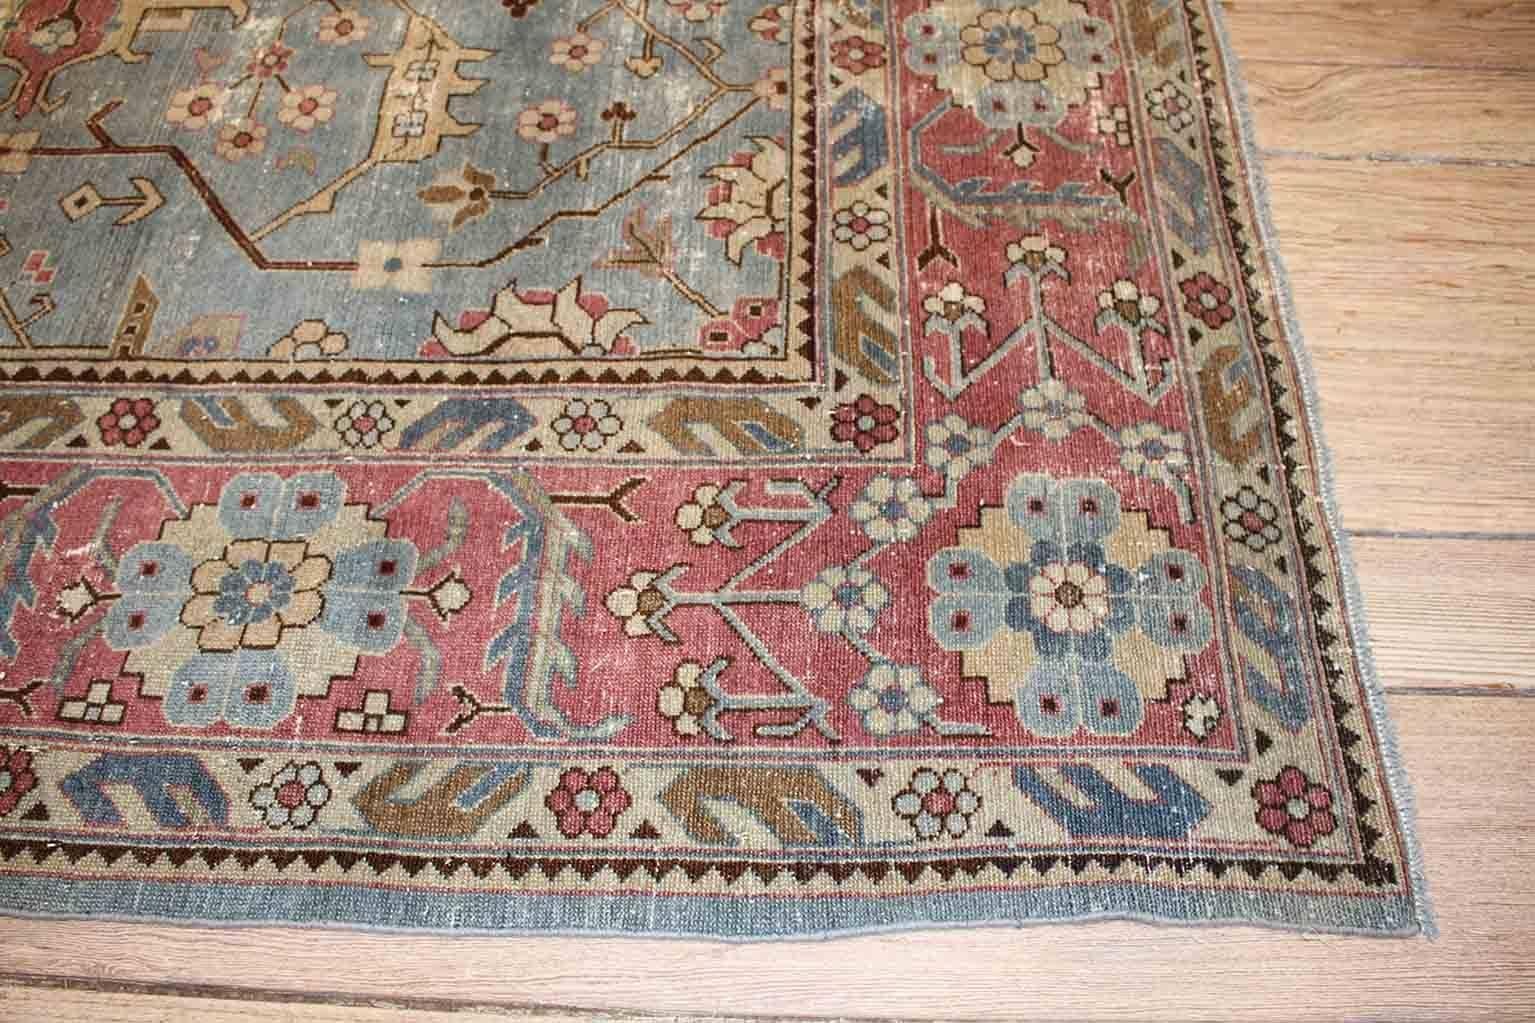 This gorgeous Lilihan rug features a traditional floral motif alongside geometric patterns. Measures 10' X 12'5